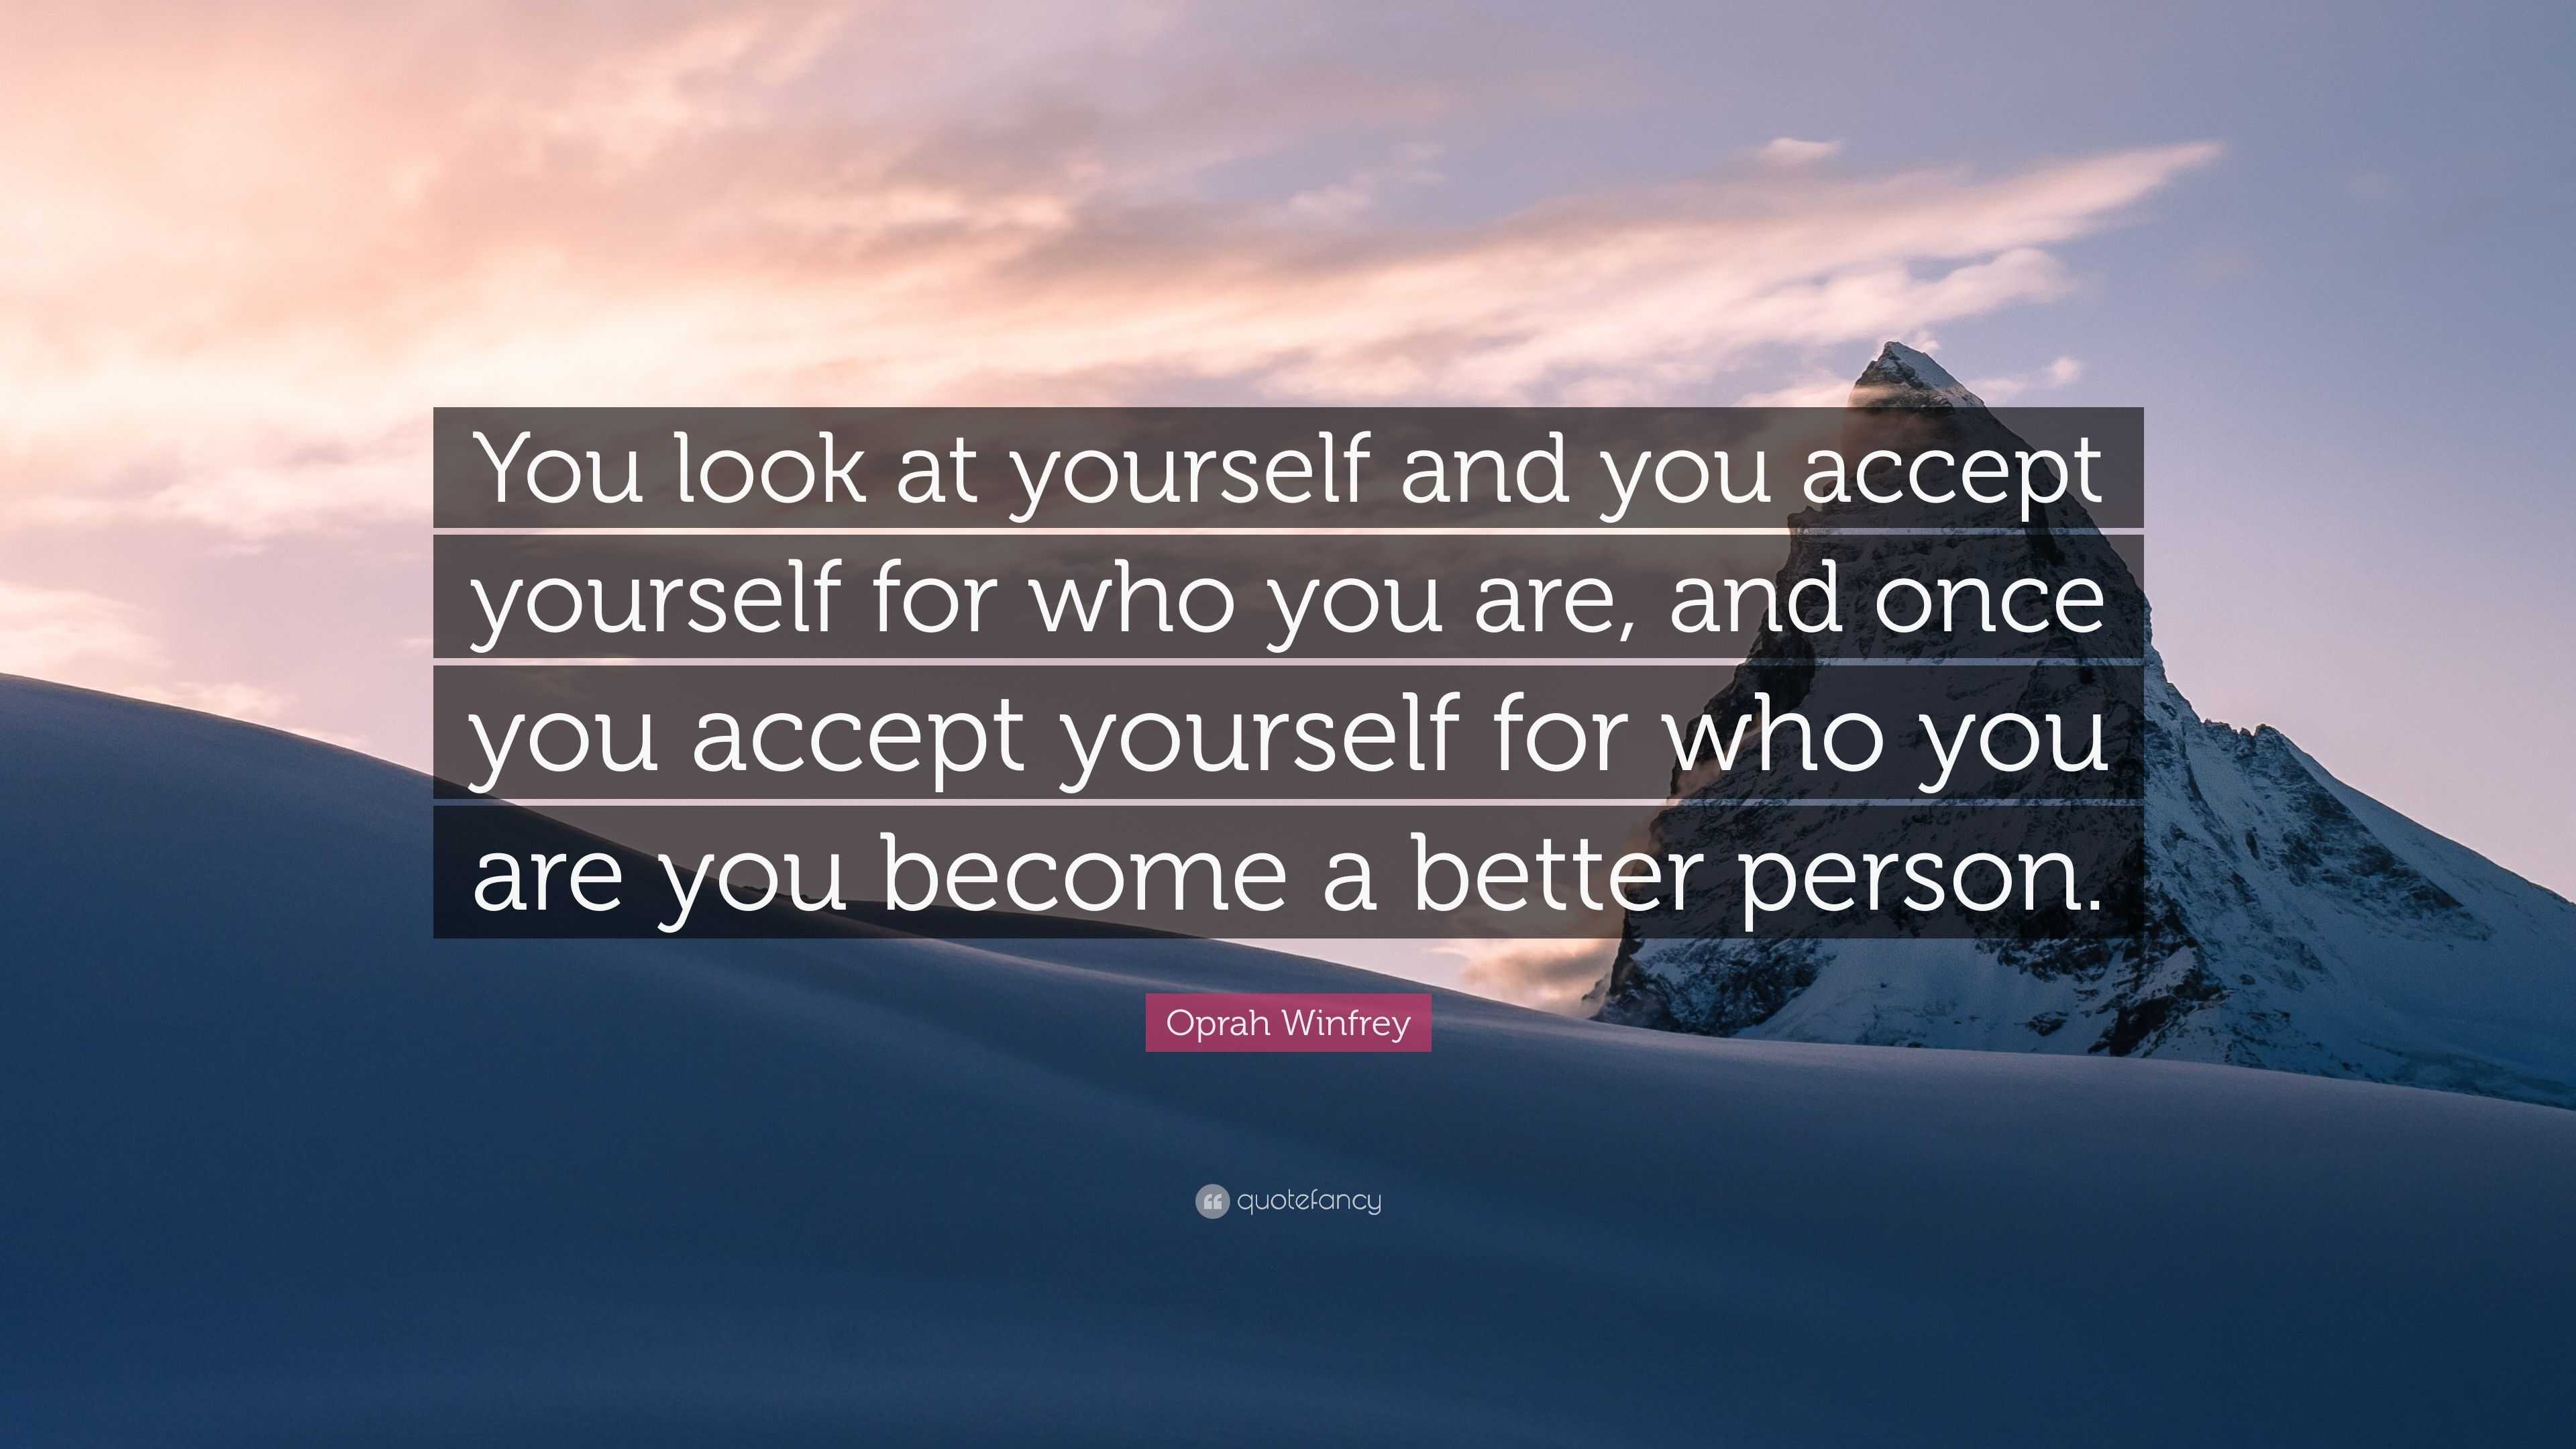 Oprah Winfrey Quote: “You look at yourself and you accept yourself for ...